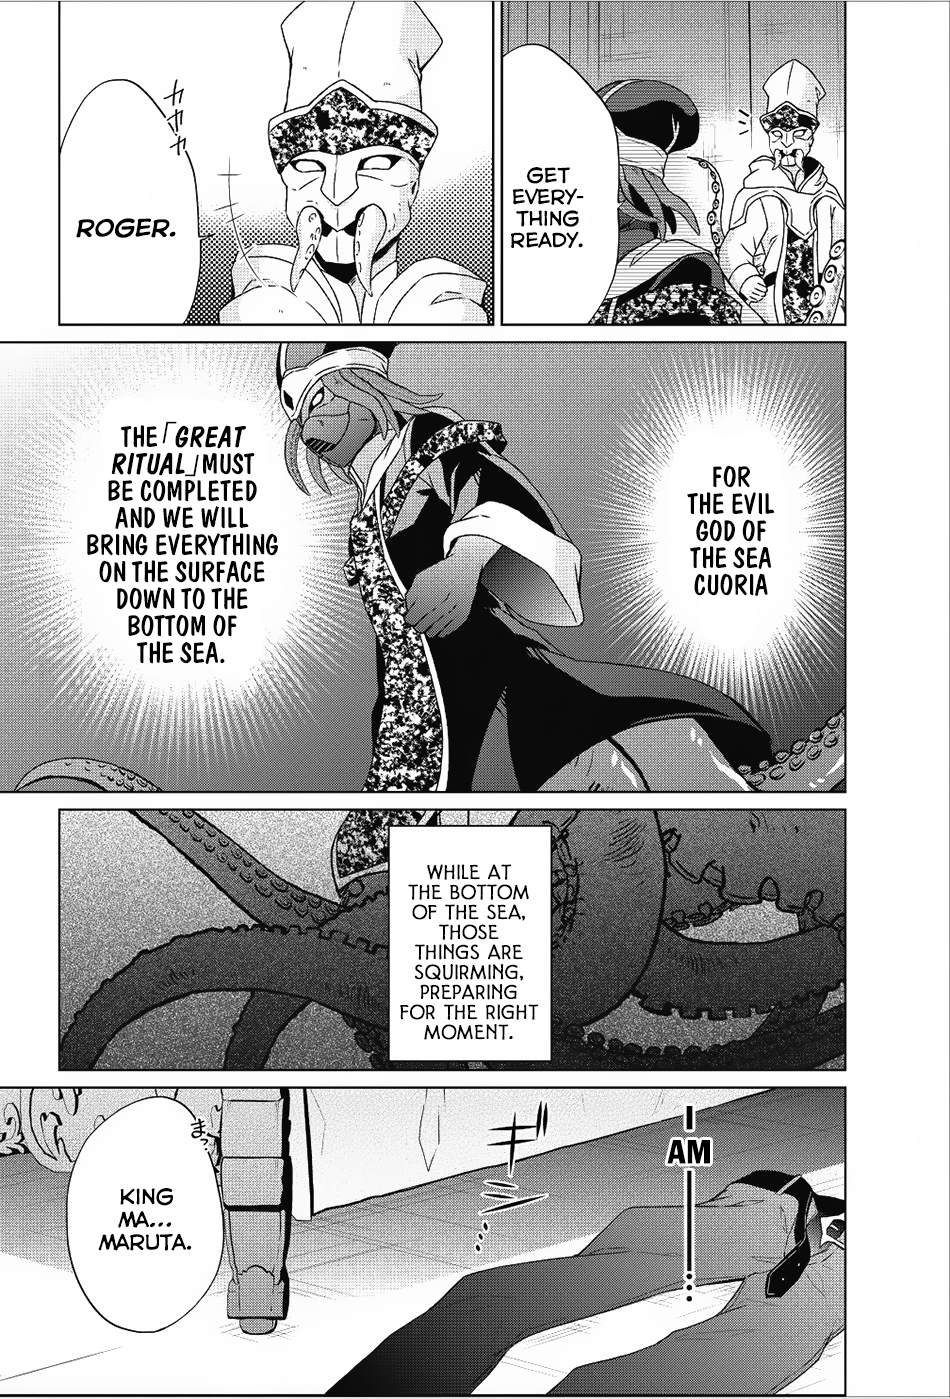 Shingan no Yuusha Vol. 4 Ch. 18 From The Darkest... Deepest Part Of The Ocean...